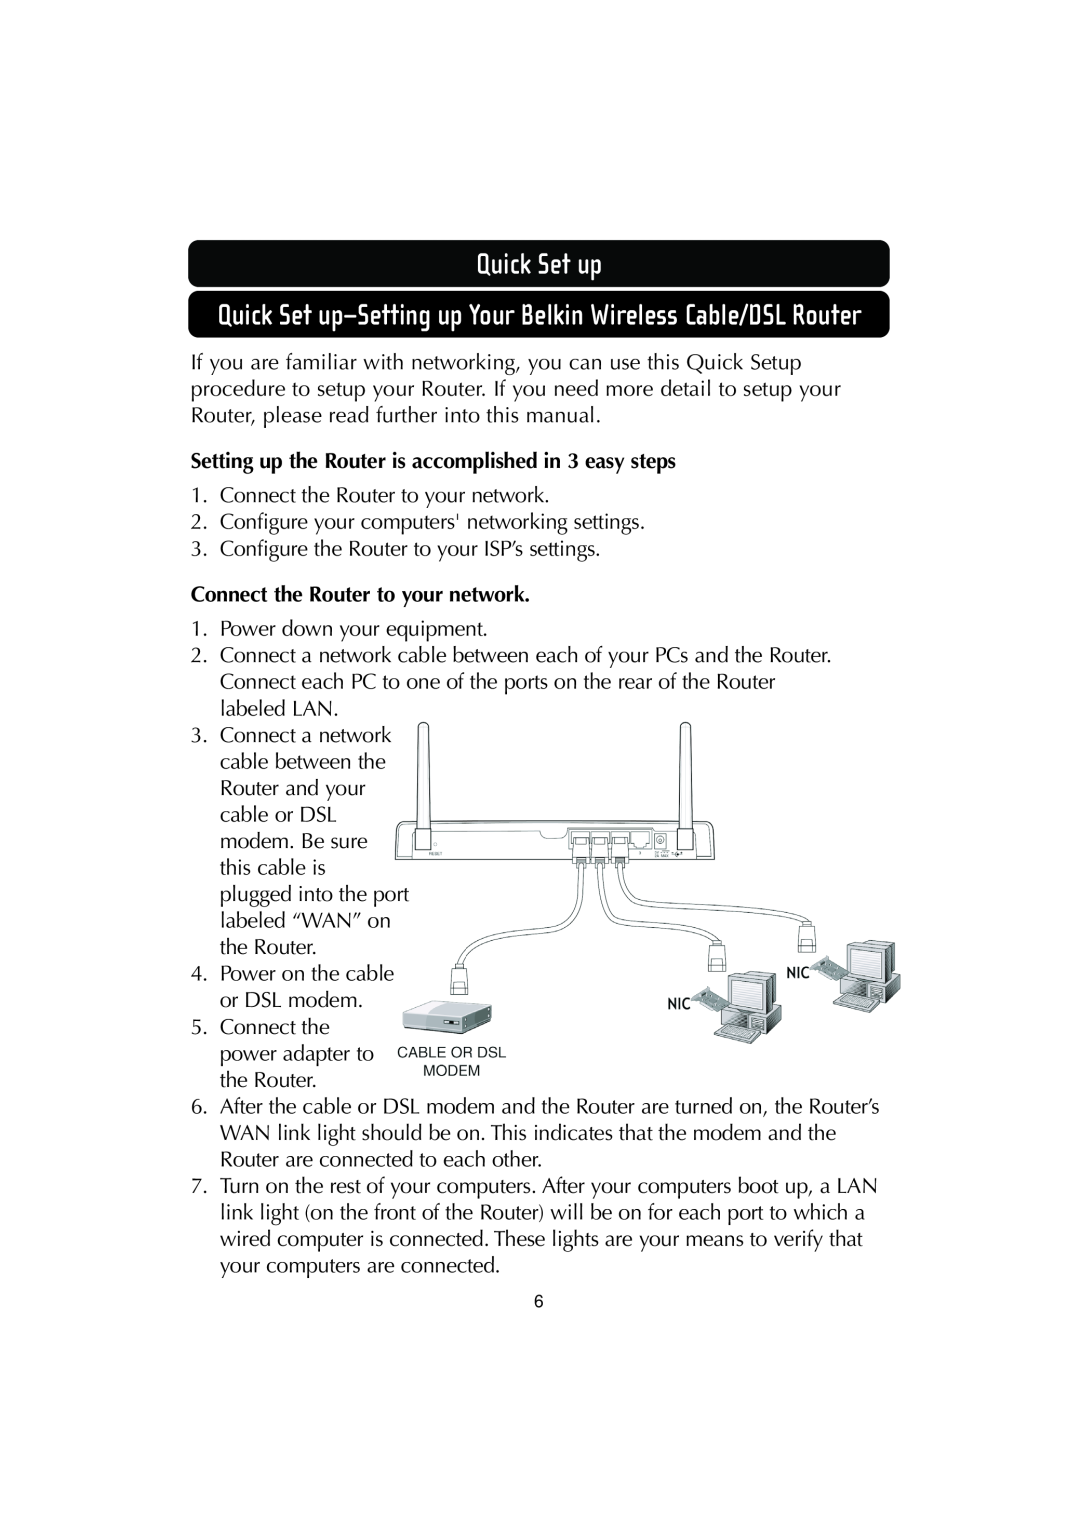 Belkin F506230-3 user manual Quick Set up-Setting up Your Belkin Wireless Cable/DSL Router 